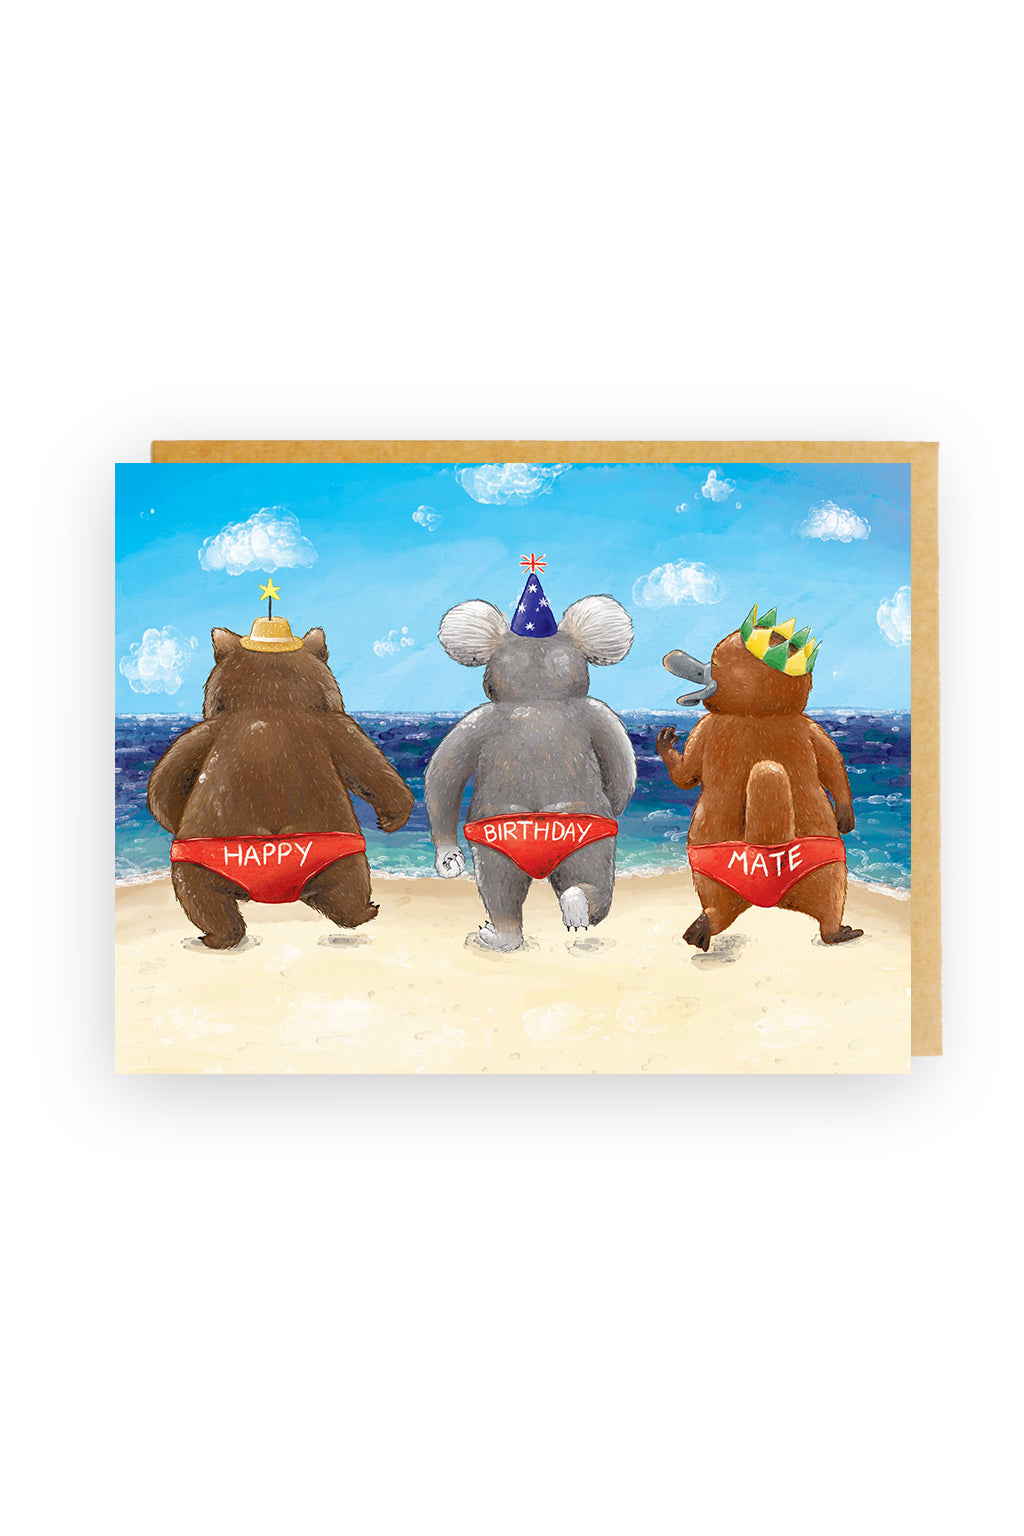 Squirrel Design Studio-Budgie Smugglers - Birthday Card-Mott and Mulberry